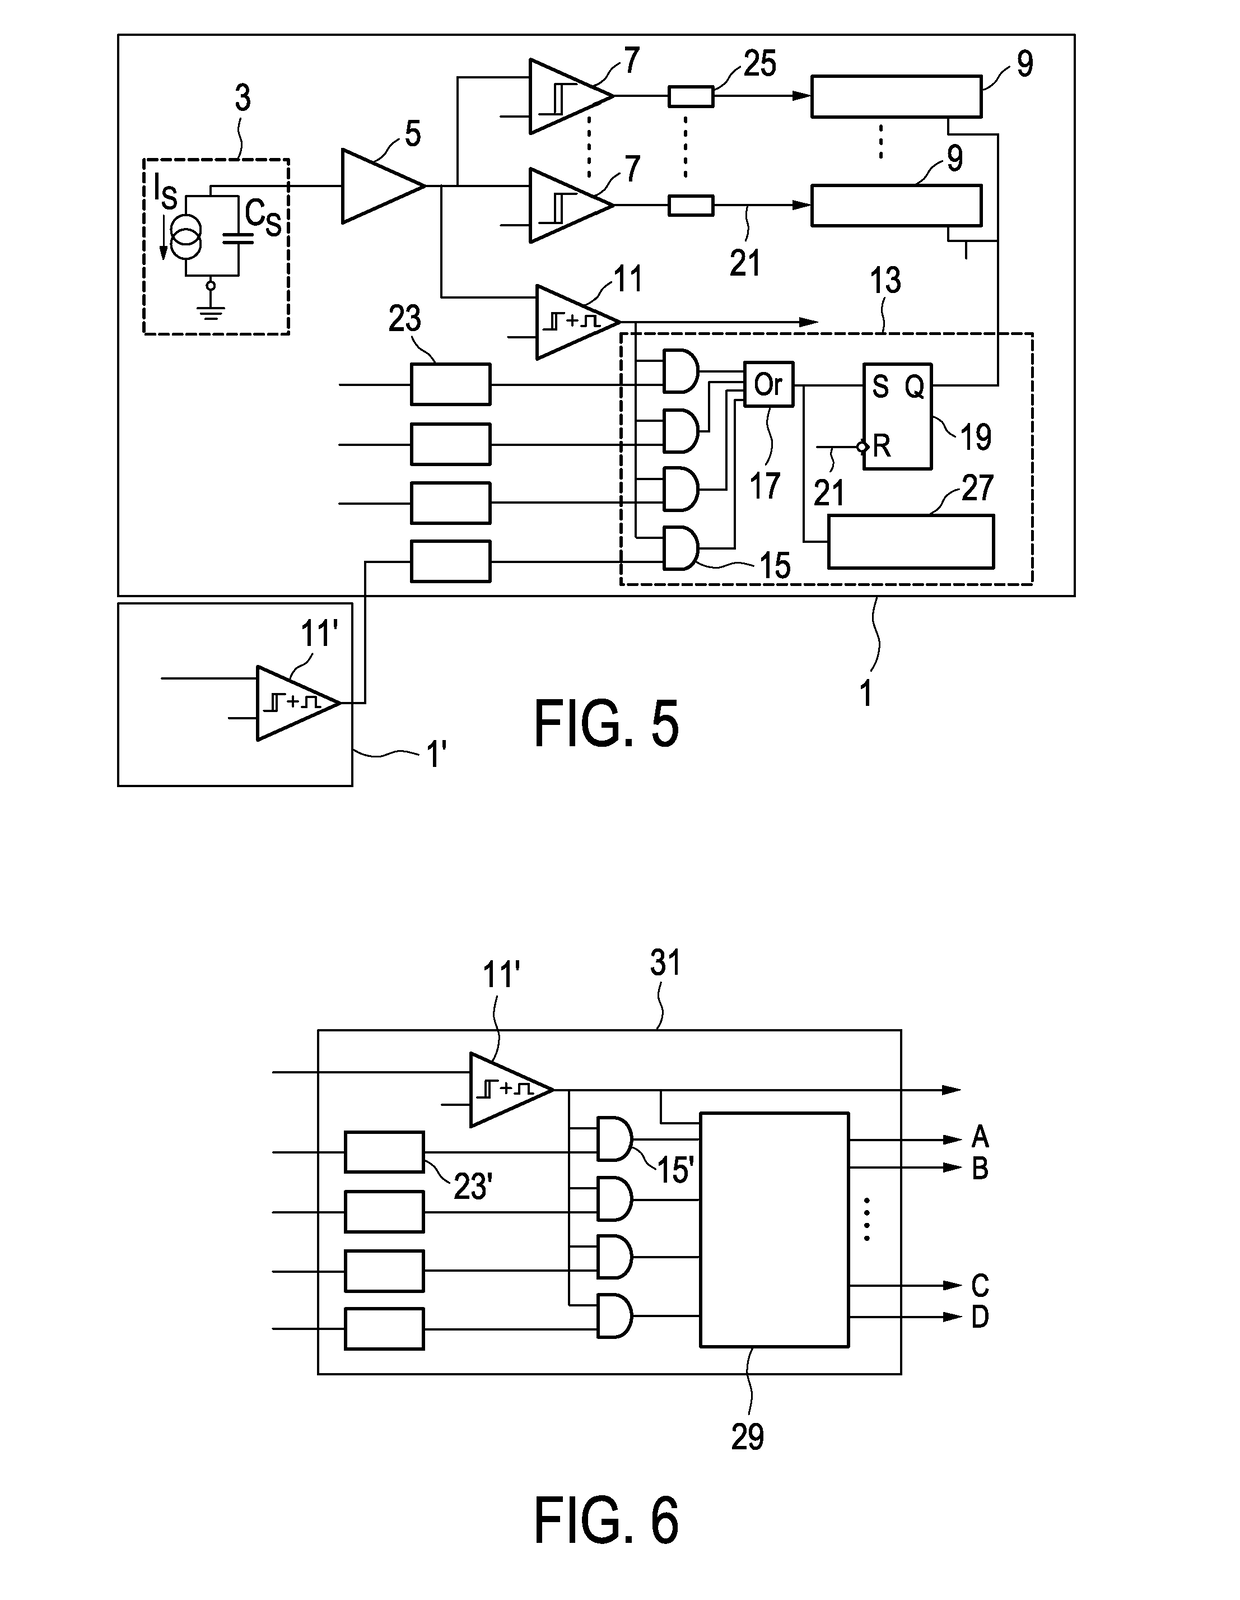 Photon counting device and method